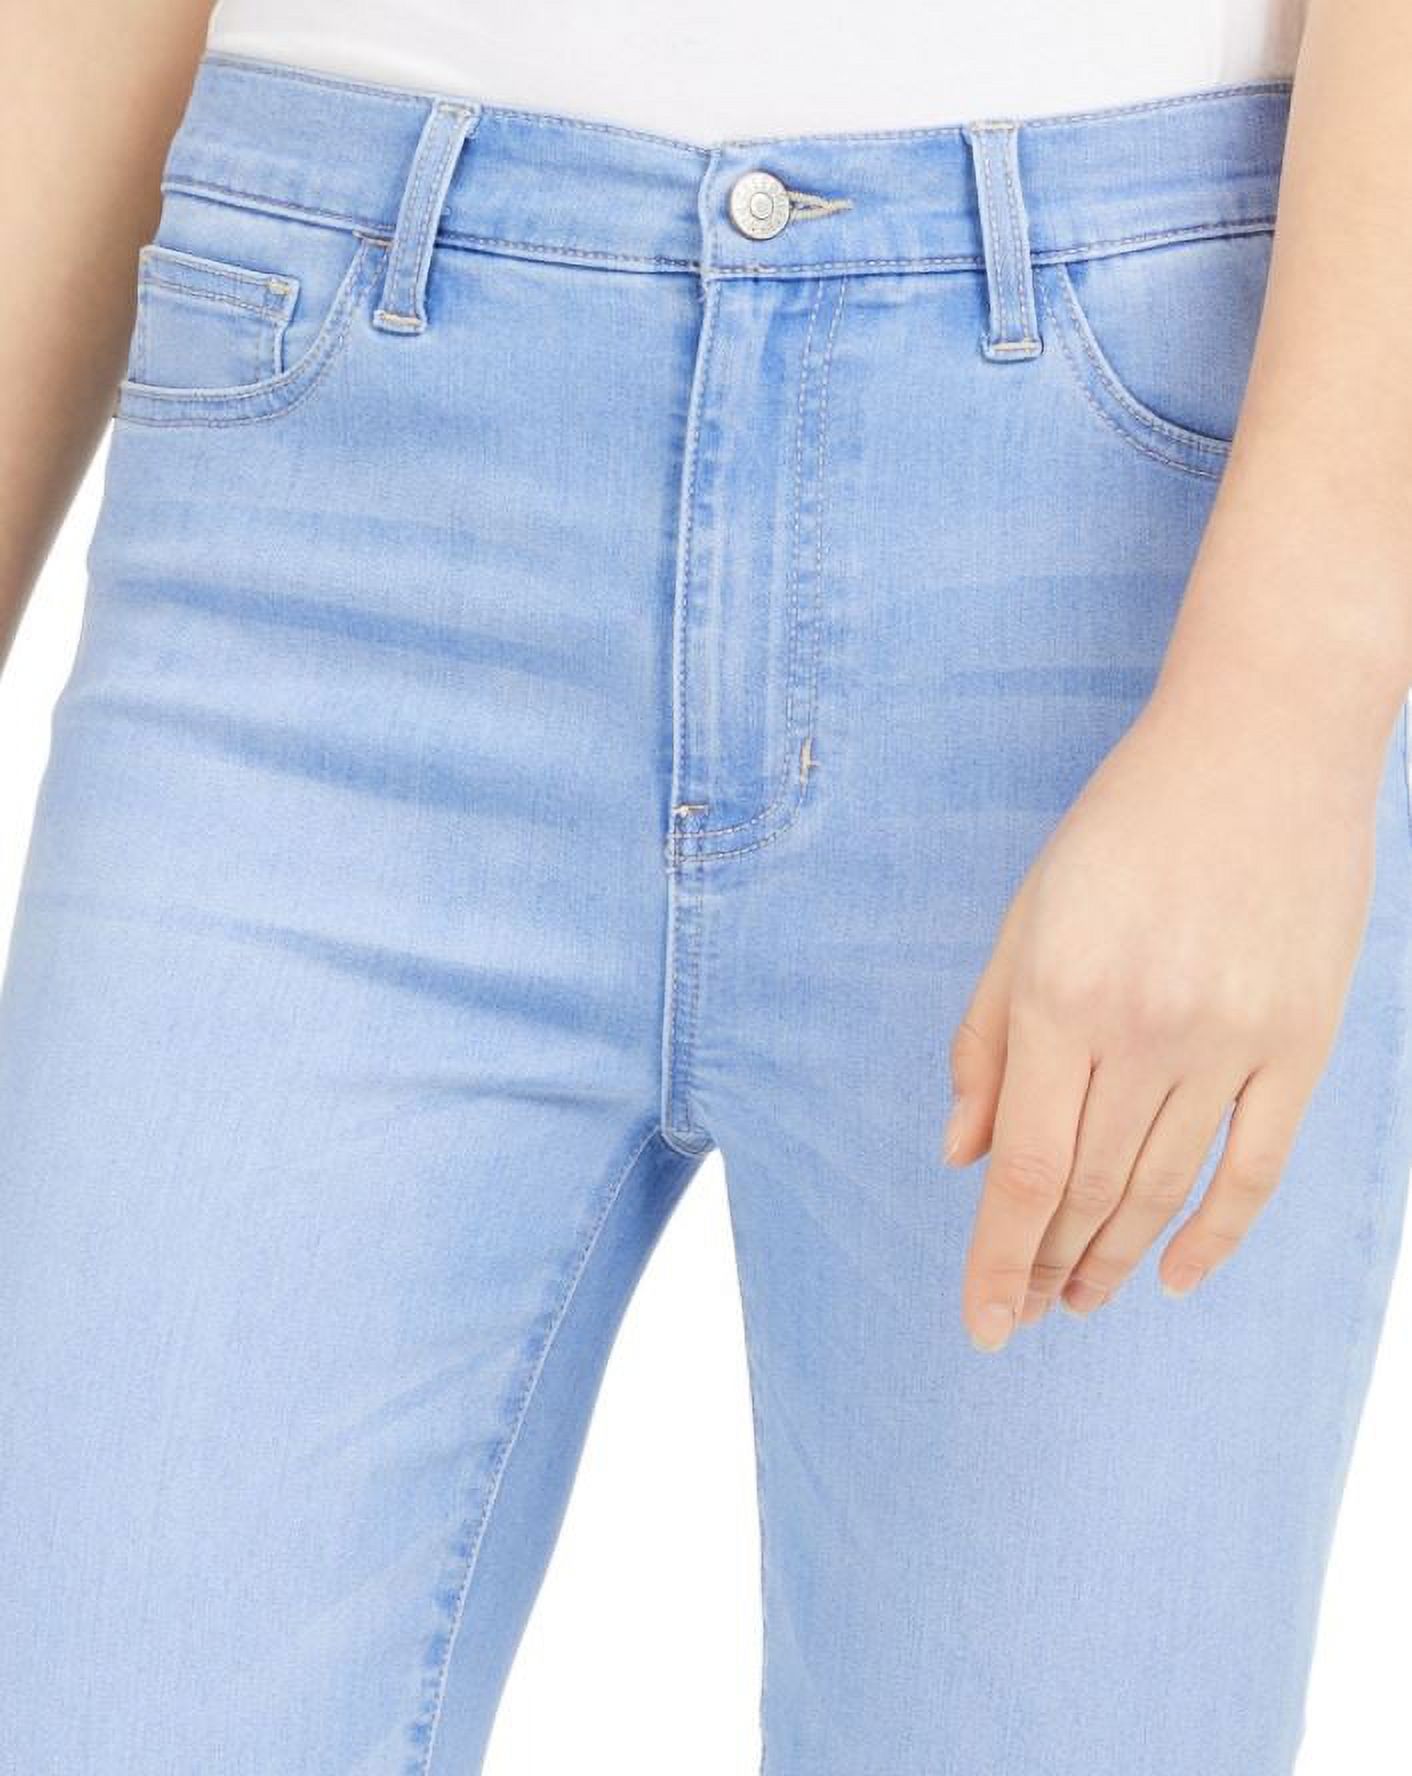 Celebrity Pink Girl's Blue Curvy Cuffed High-Rise Cropped Jeans, 0/24 - image 4 of 5